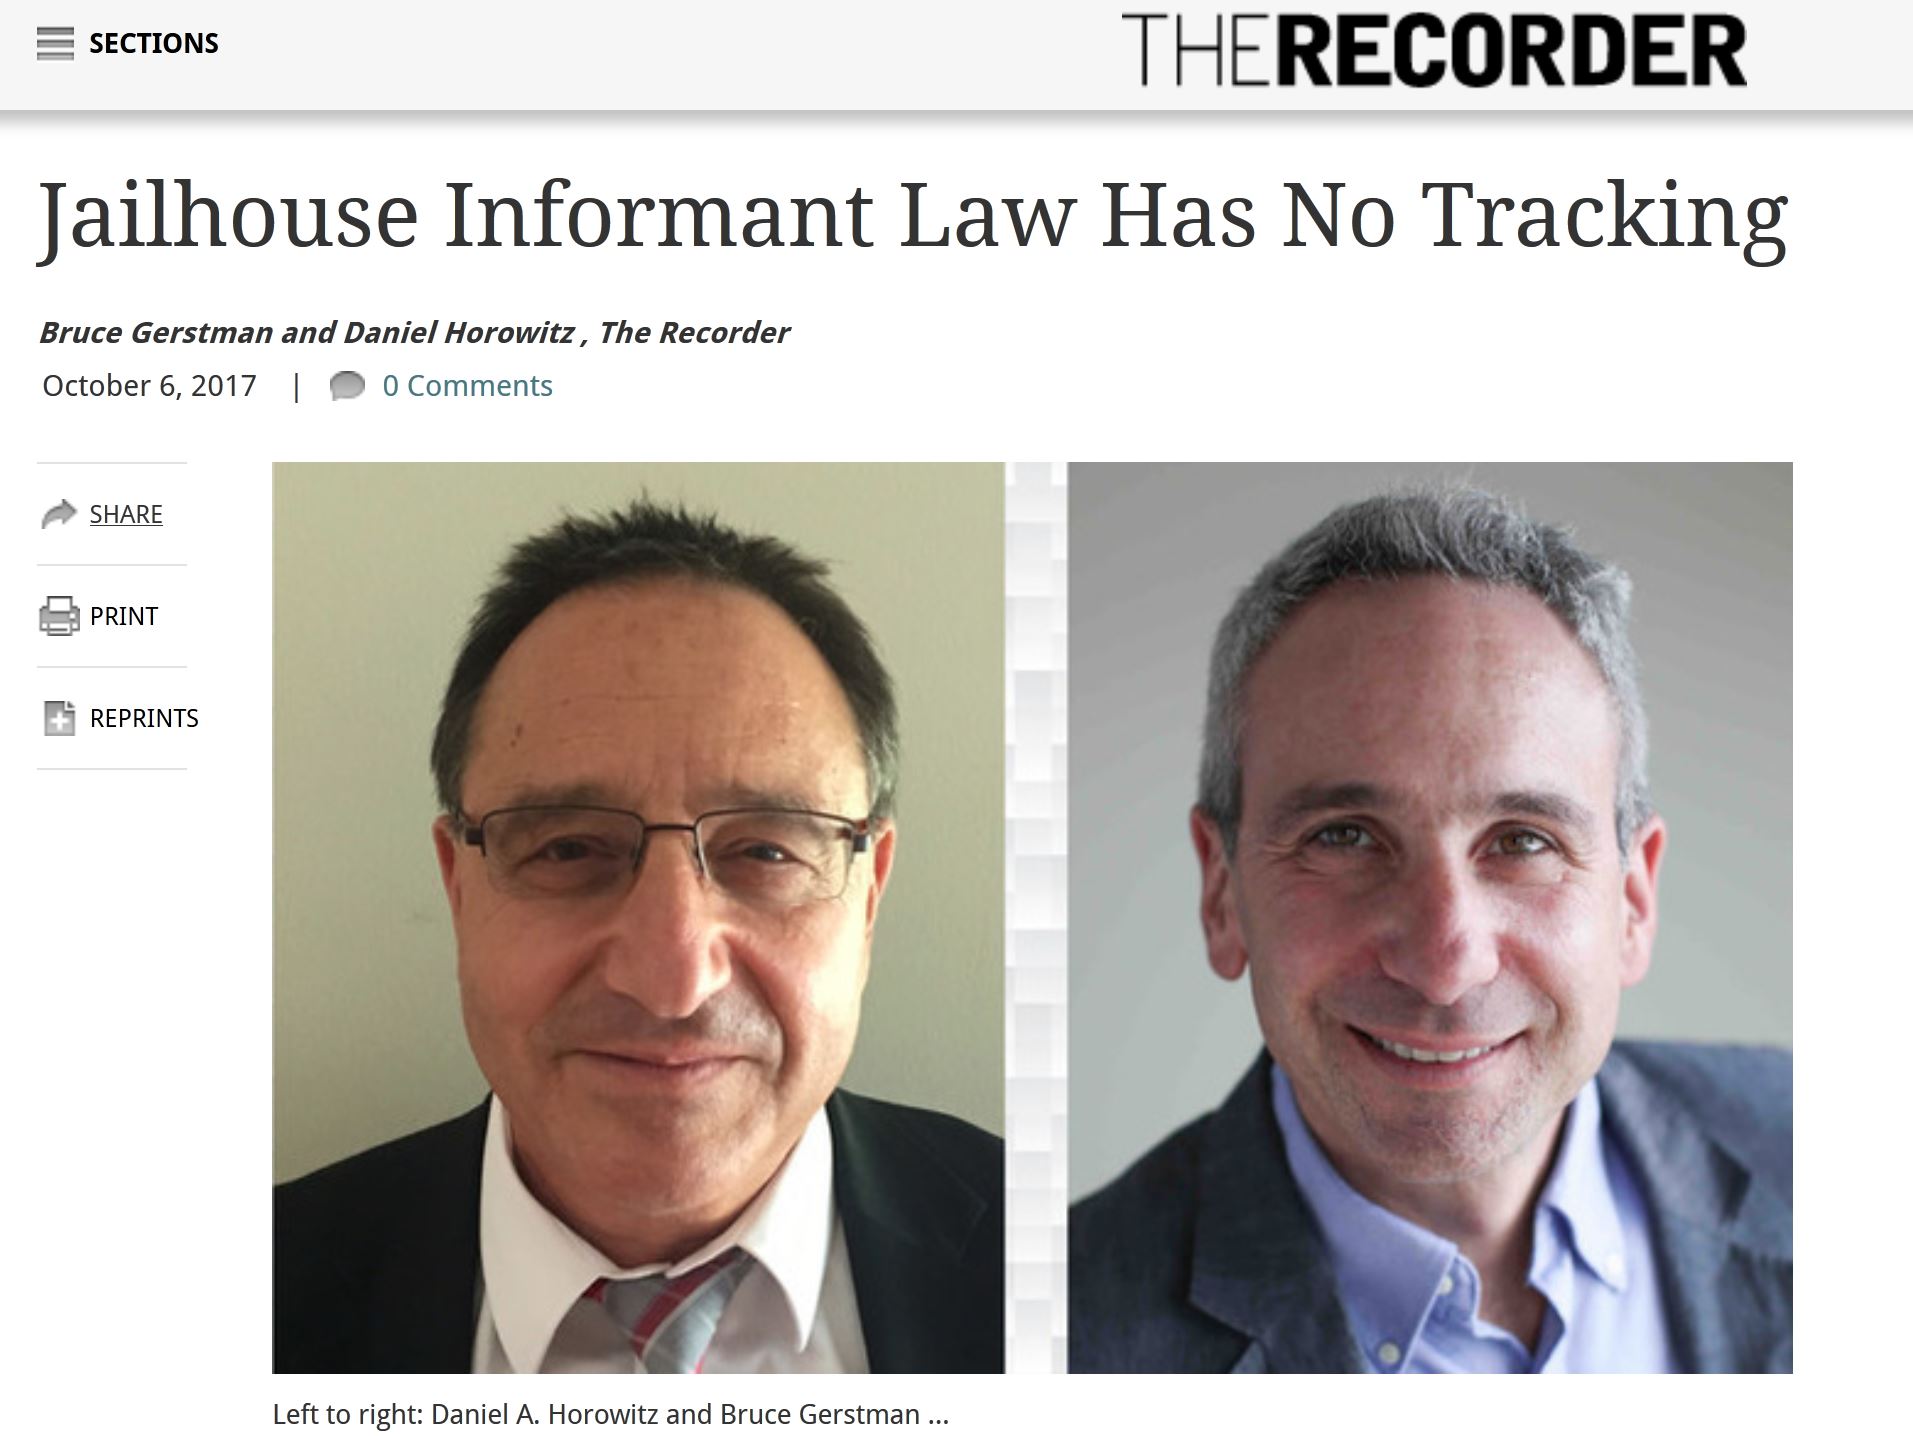 Bruce Gerstman and Dan Horowitz write article for recorder newspaper about jail house informants (jailhouse)